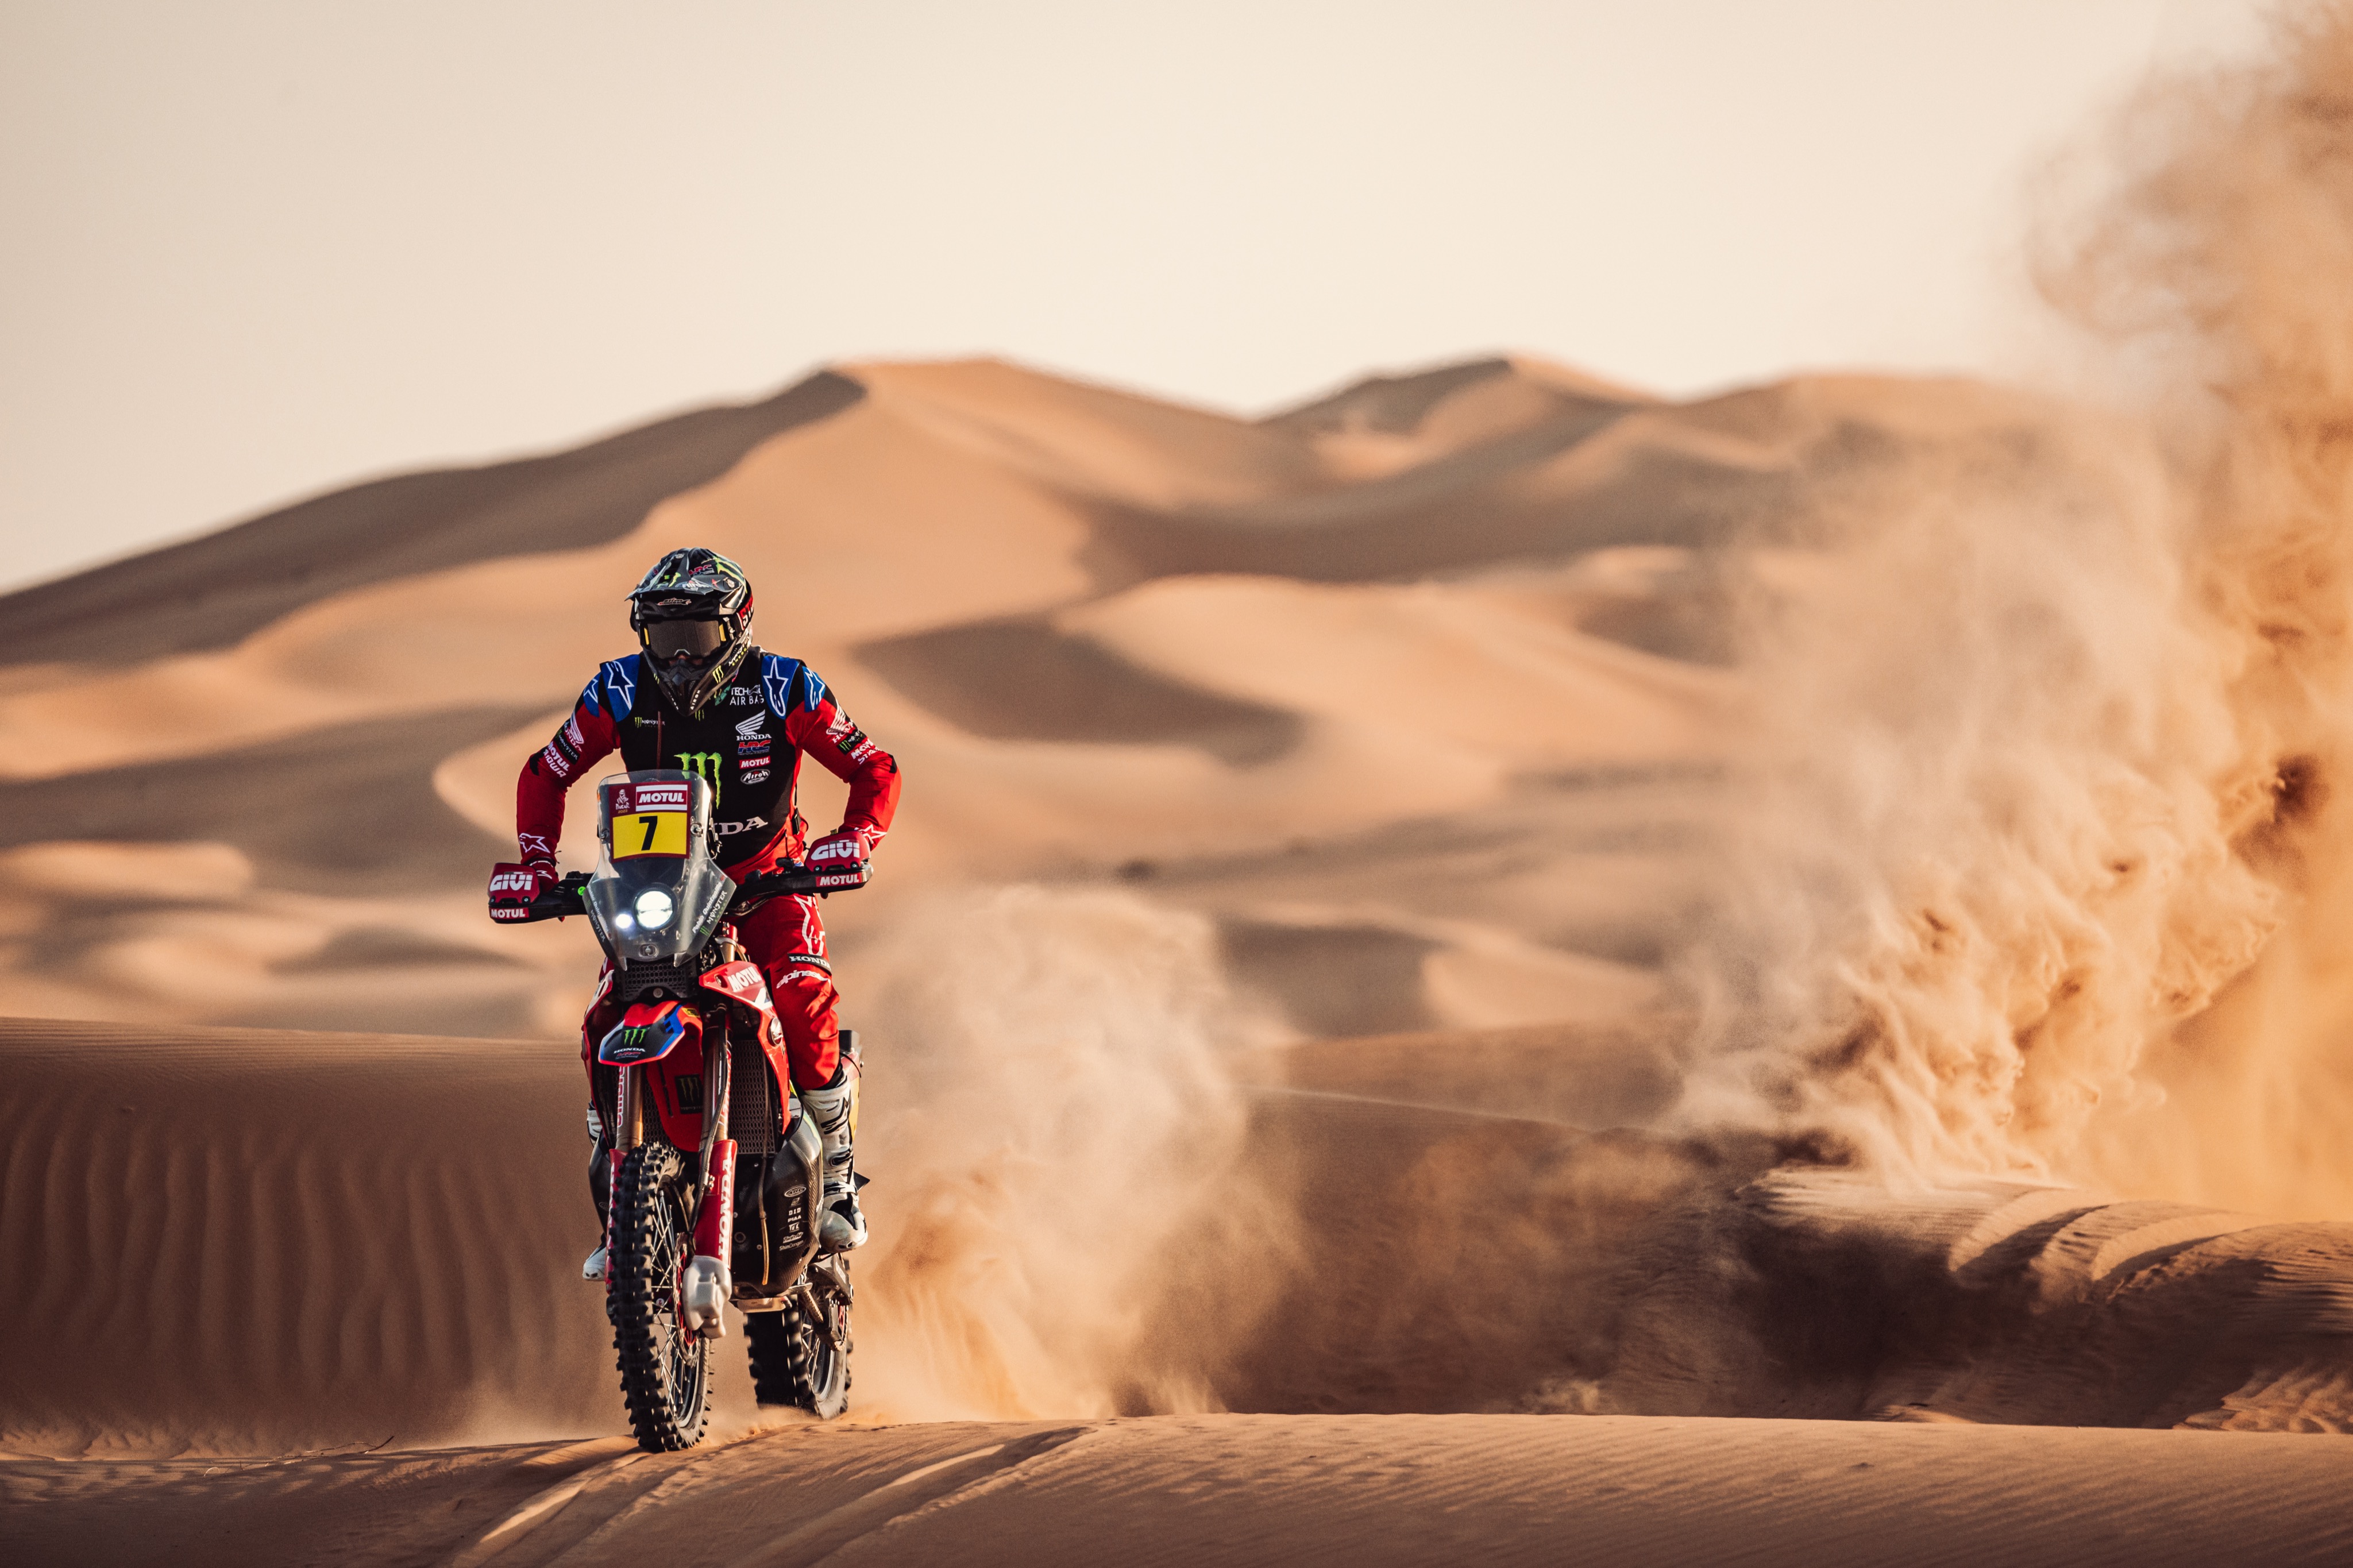 Only one more stage to go at the Dakar Rally